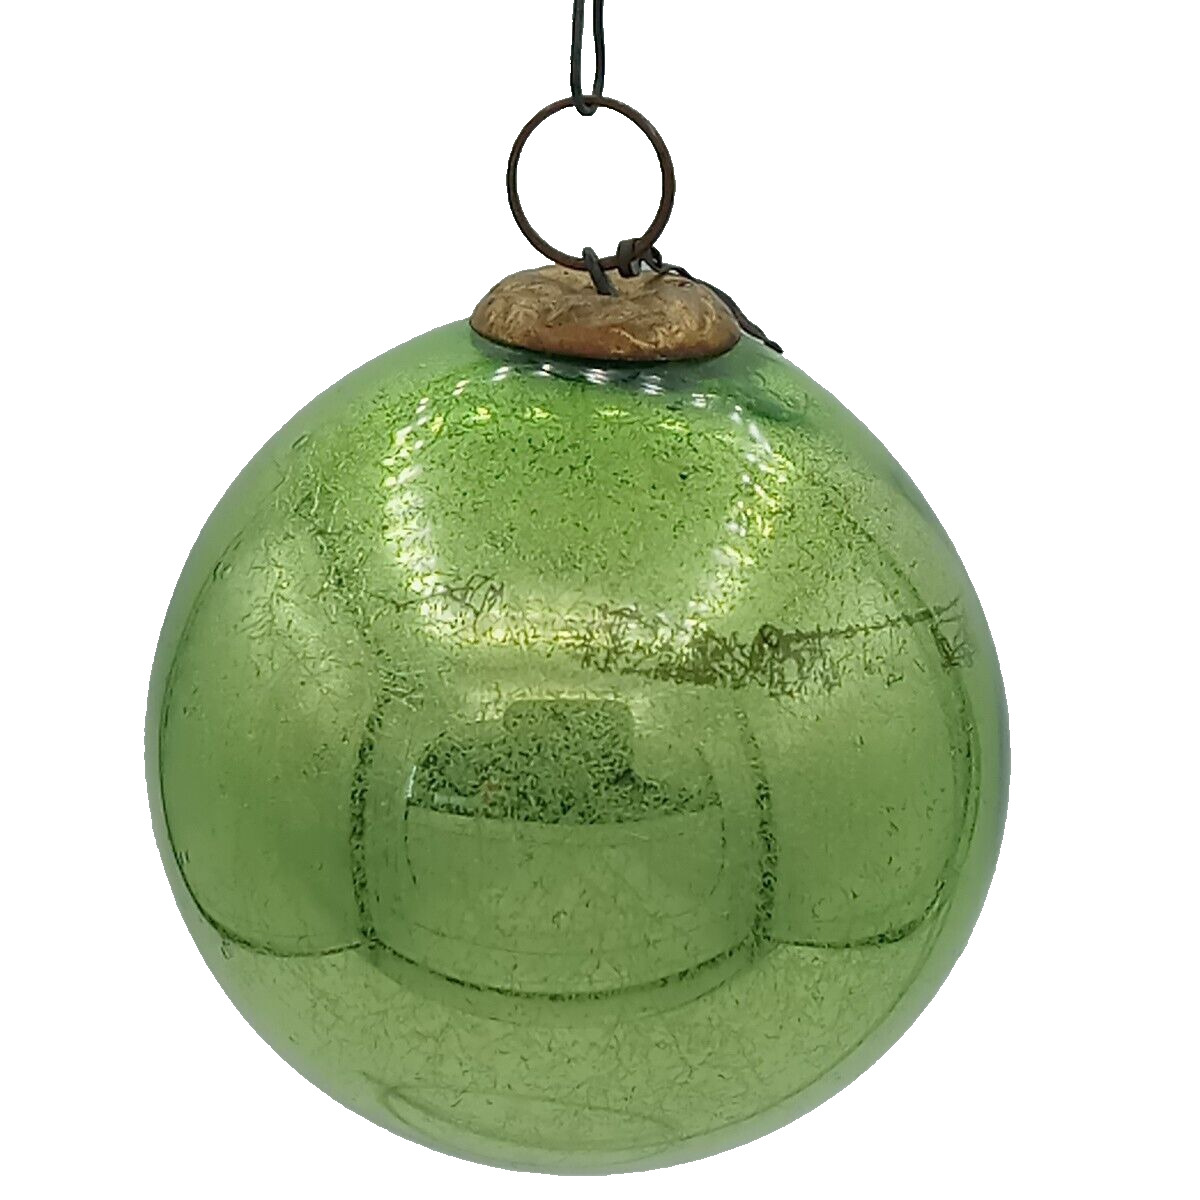 Very Old Antique Pea Green Kugel Christmas Ornament German Hand Blown Glass 2.5”